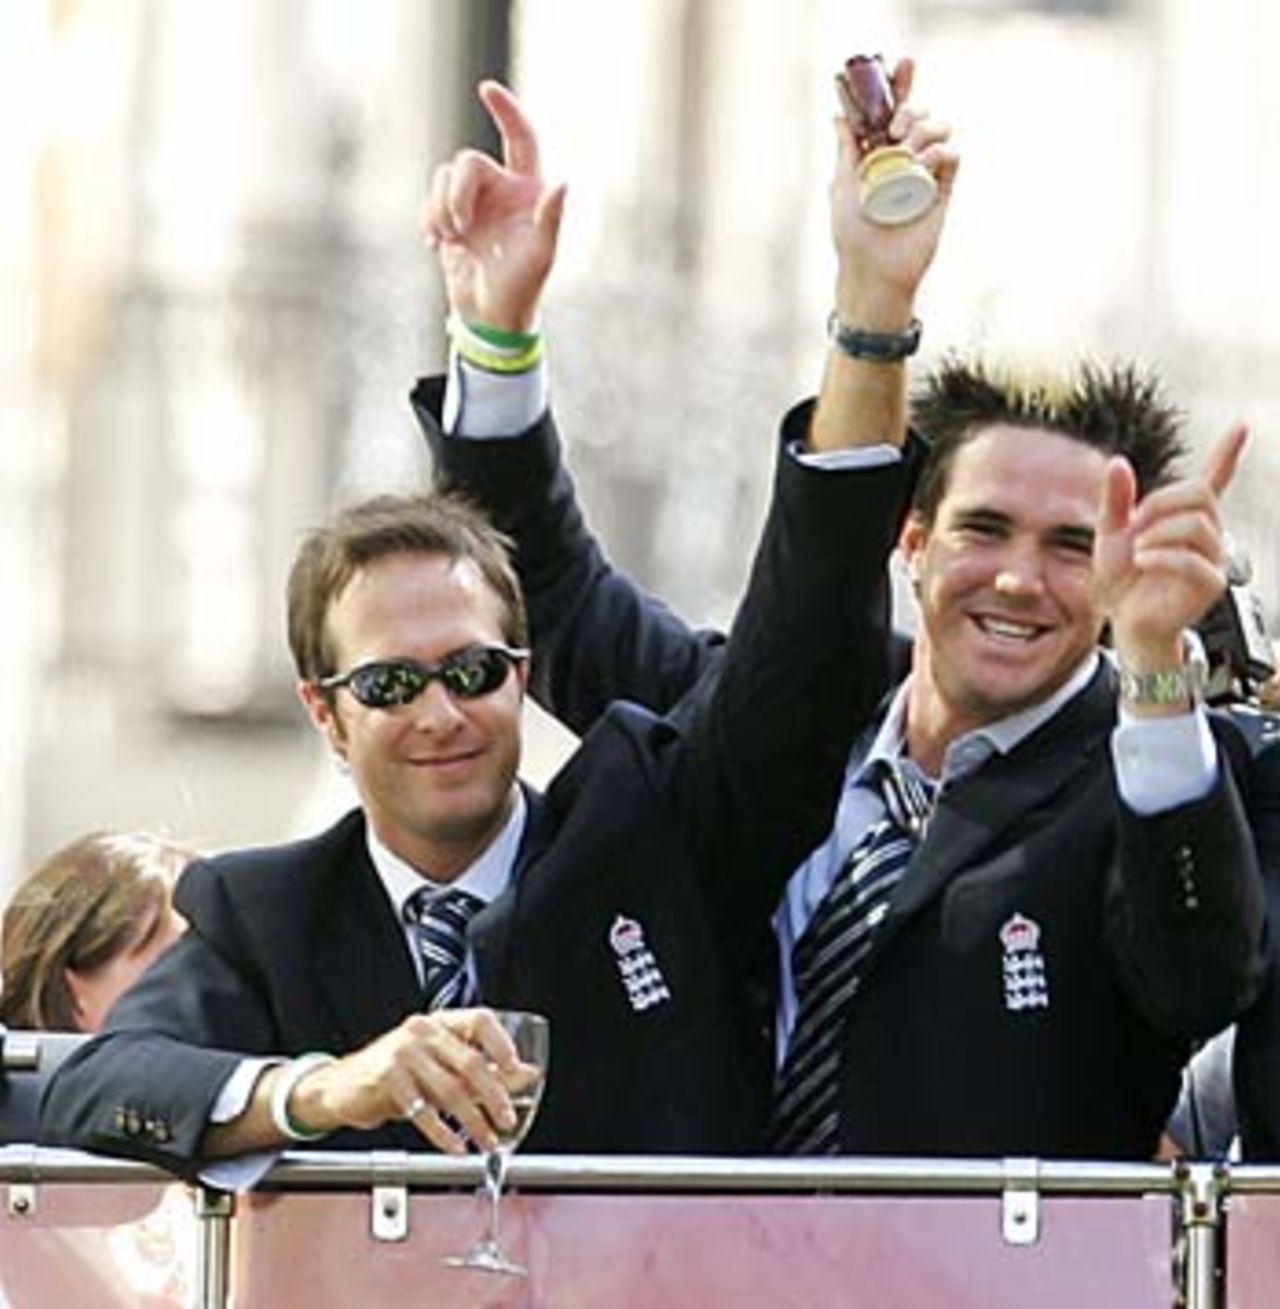 Michael Vaughan and Kevin Pietersen acknowledge the crowds, London,  September 13, 2005